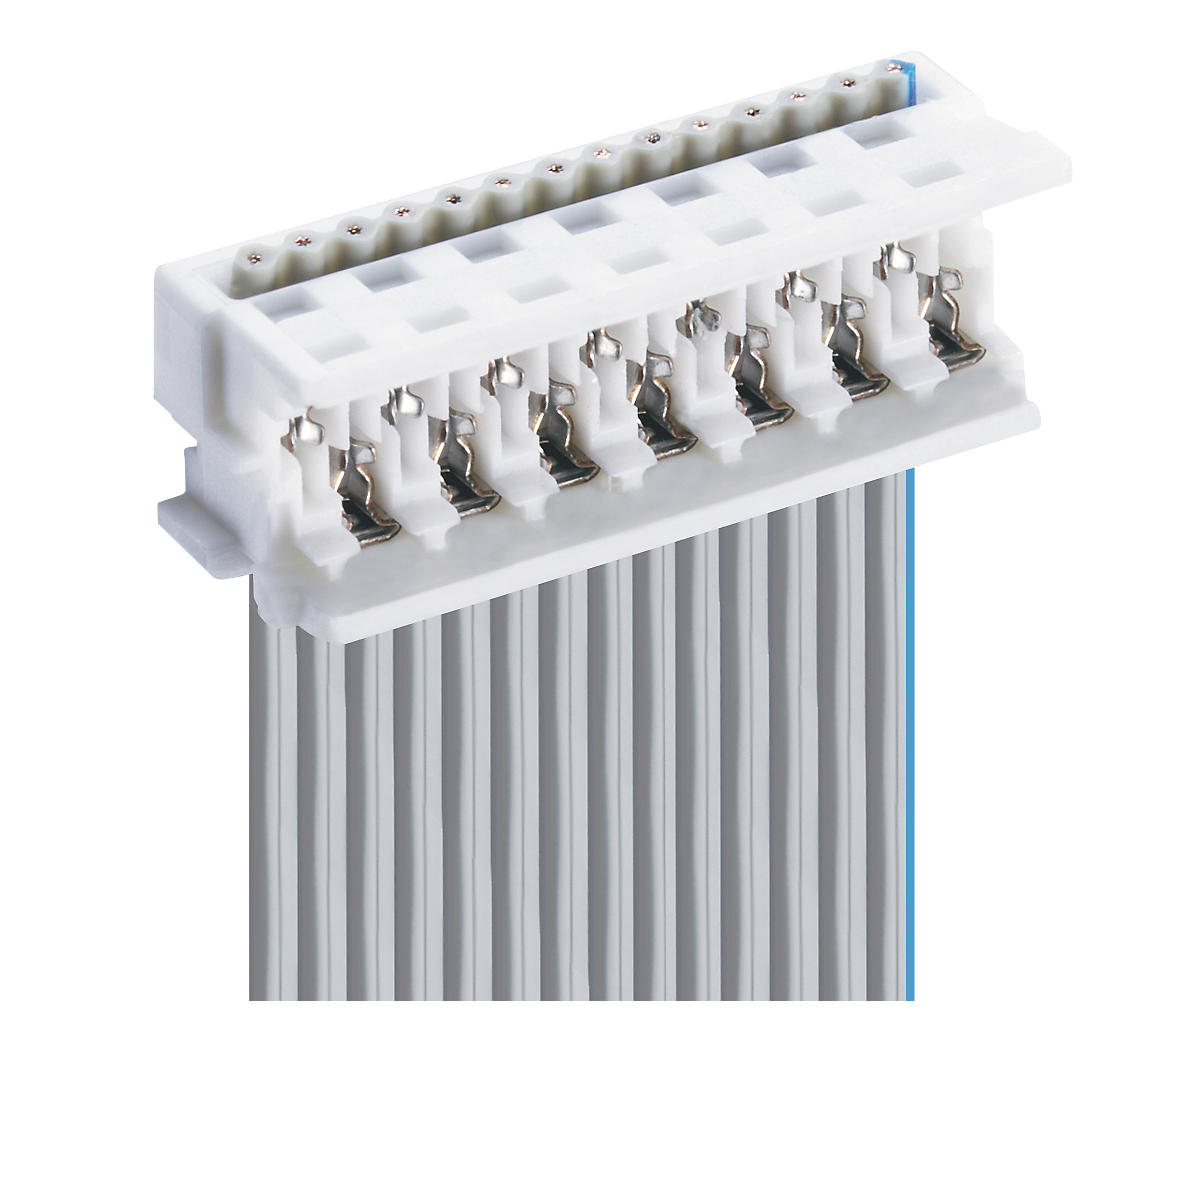 Lumberg: MICA (Series 30 | Micromodul™ connectors, pitch 1.27 mm)